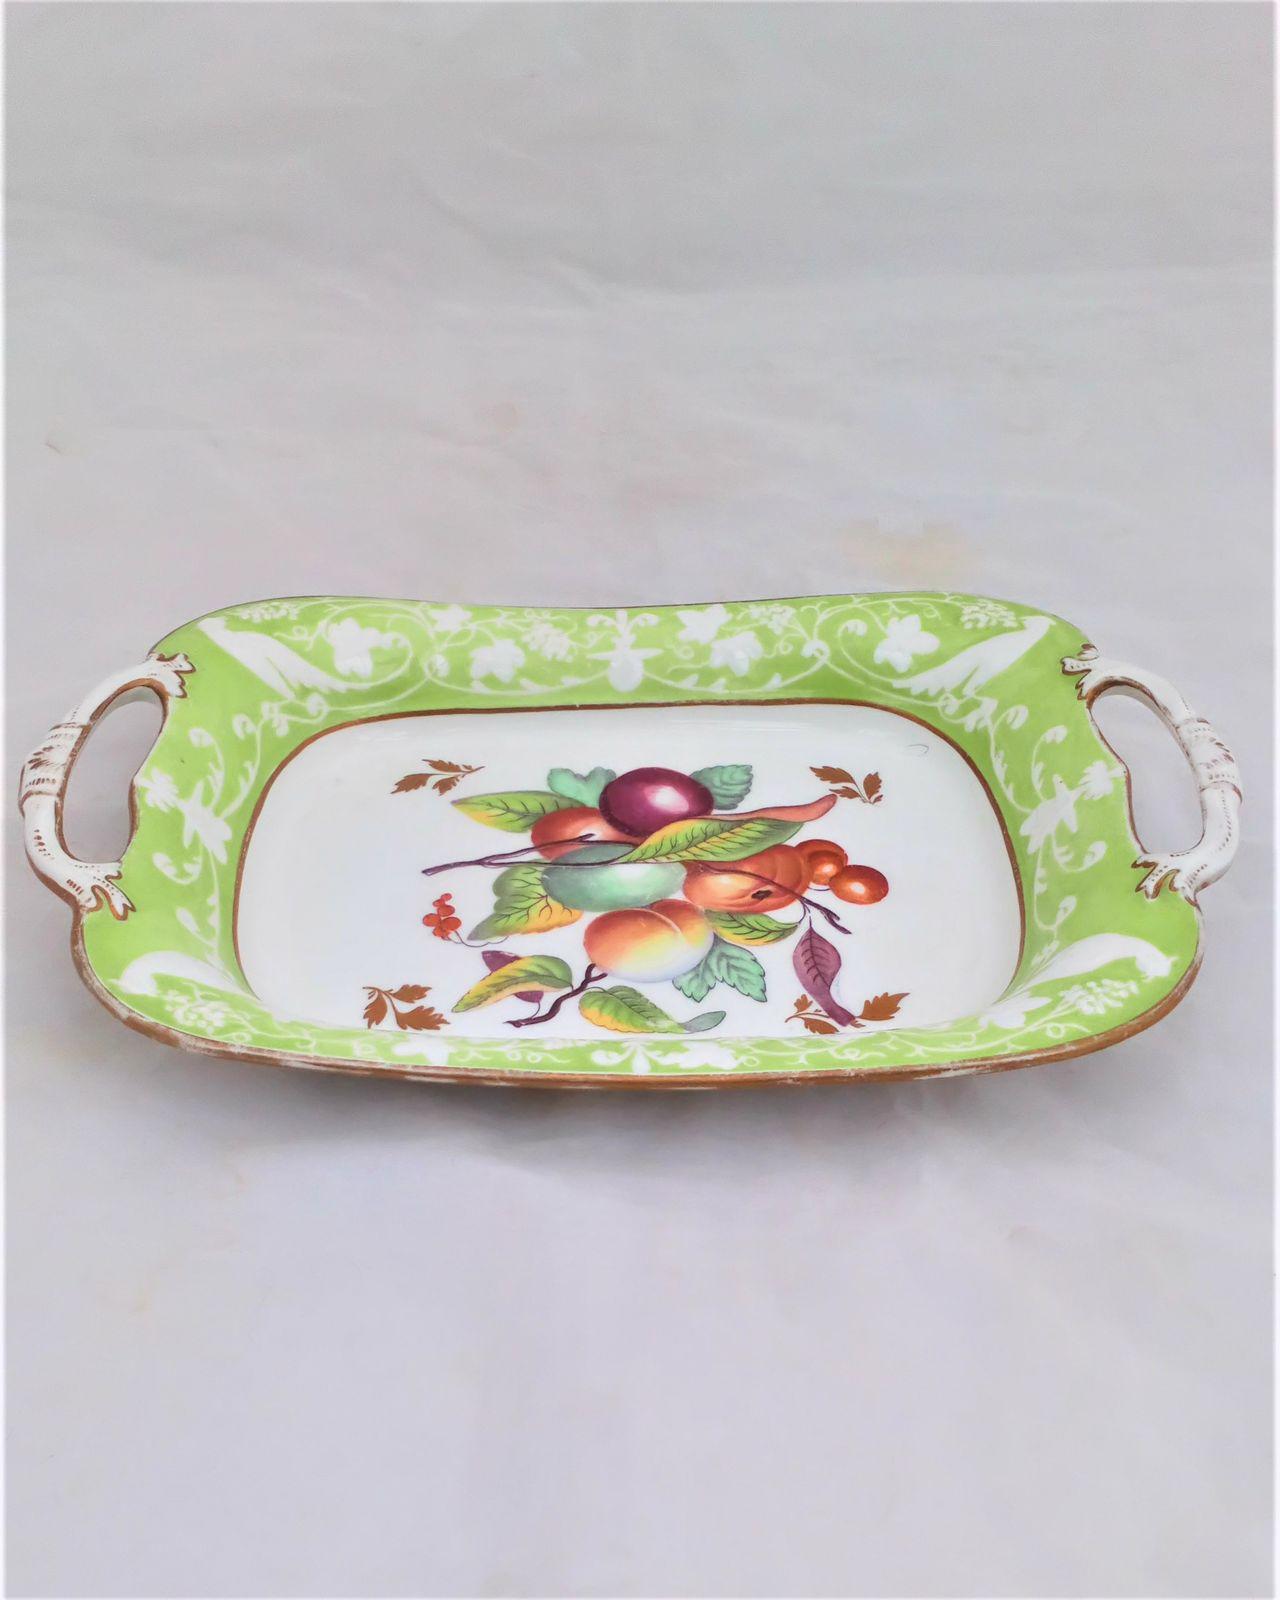 Antique New Hall Porcelain rectangular twin handled dessert dish with low relief rim of birds and fruiting vines on a light green ground. It has a central transfer printed and hand coloured fruit decoration , made in the Georgian period circa 1820 to 1831.